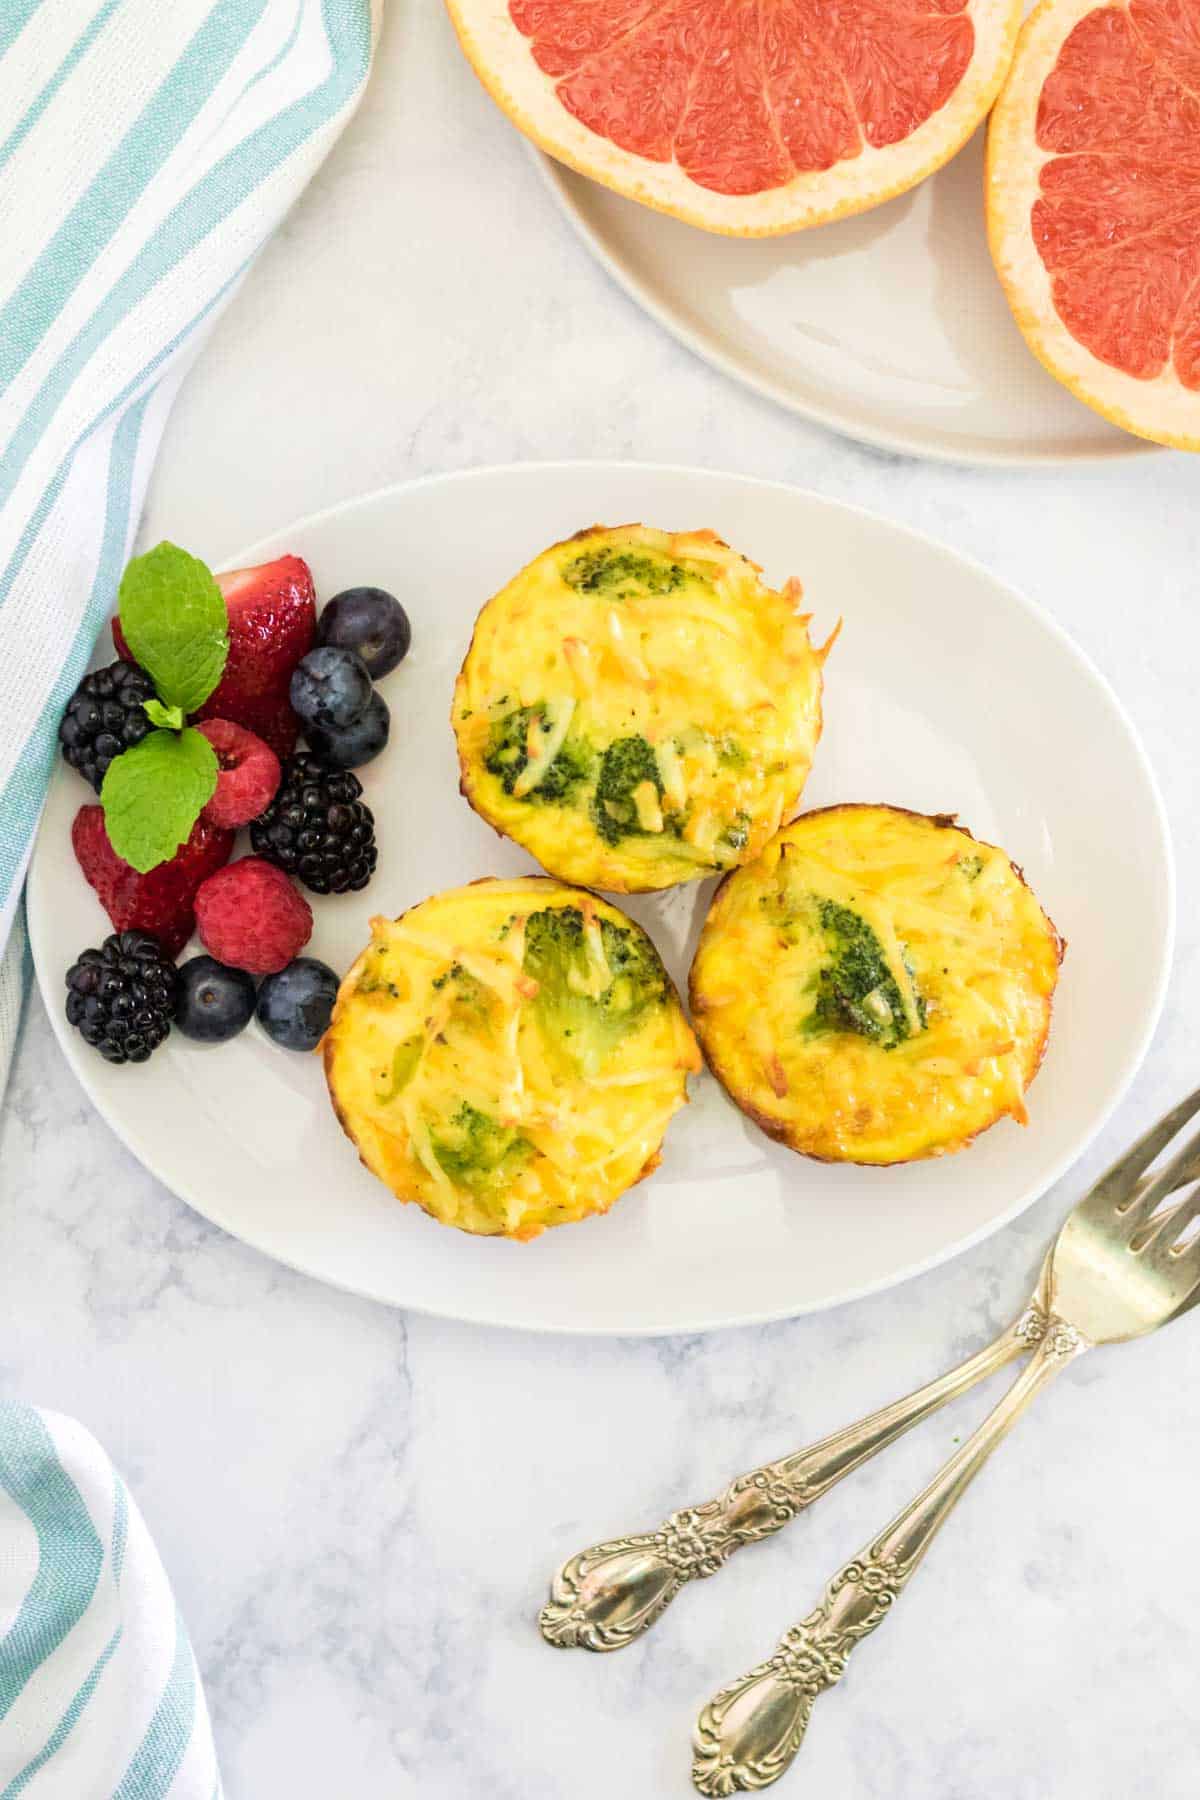 three broccoli egg muffins on a white plate with fruit and a couple of forks on the table